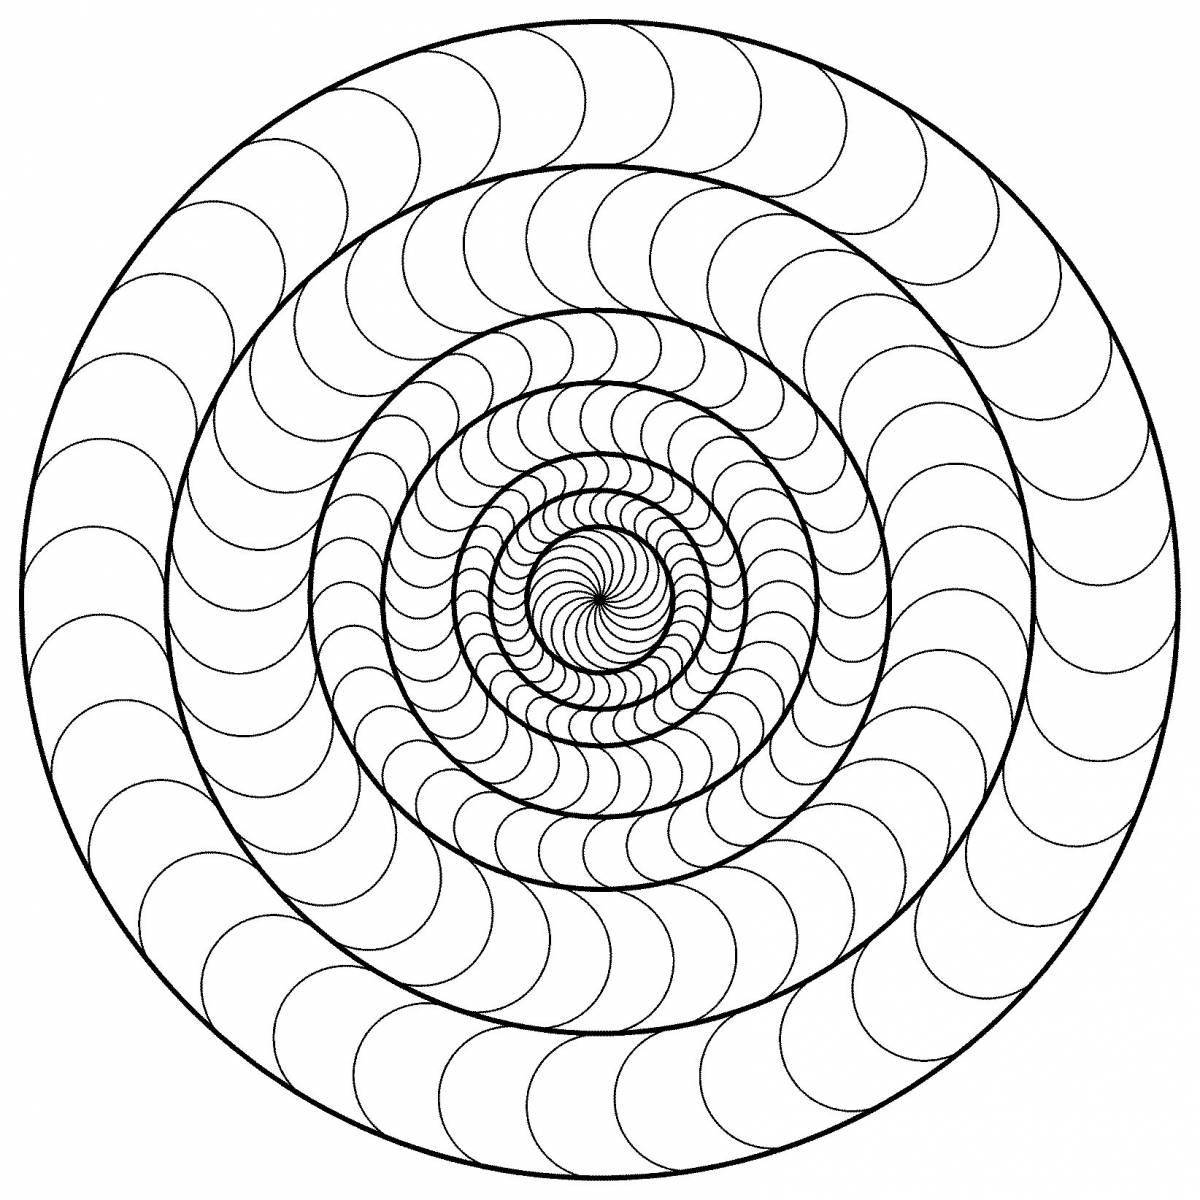 Coloring page joyful circle with lines